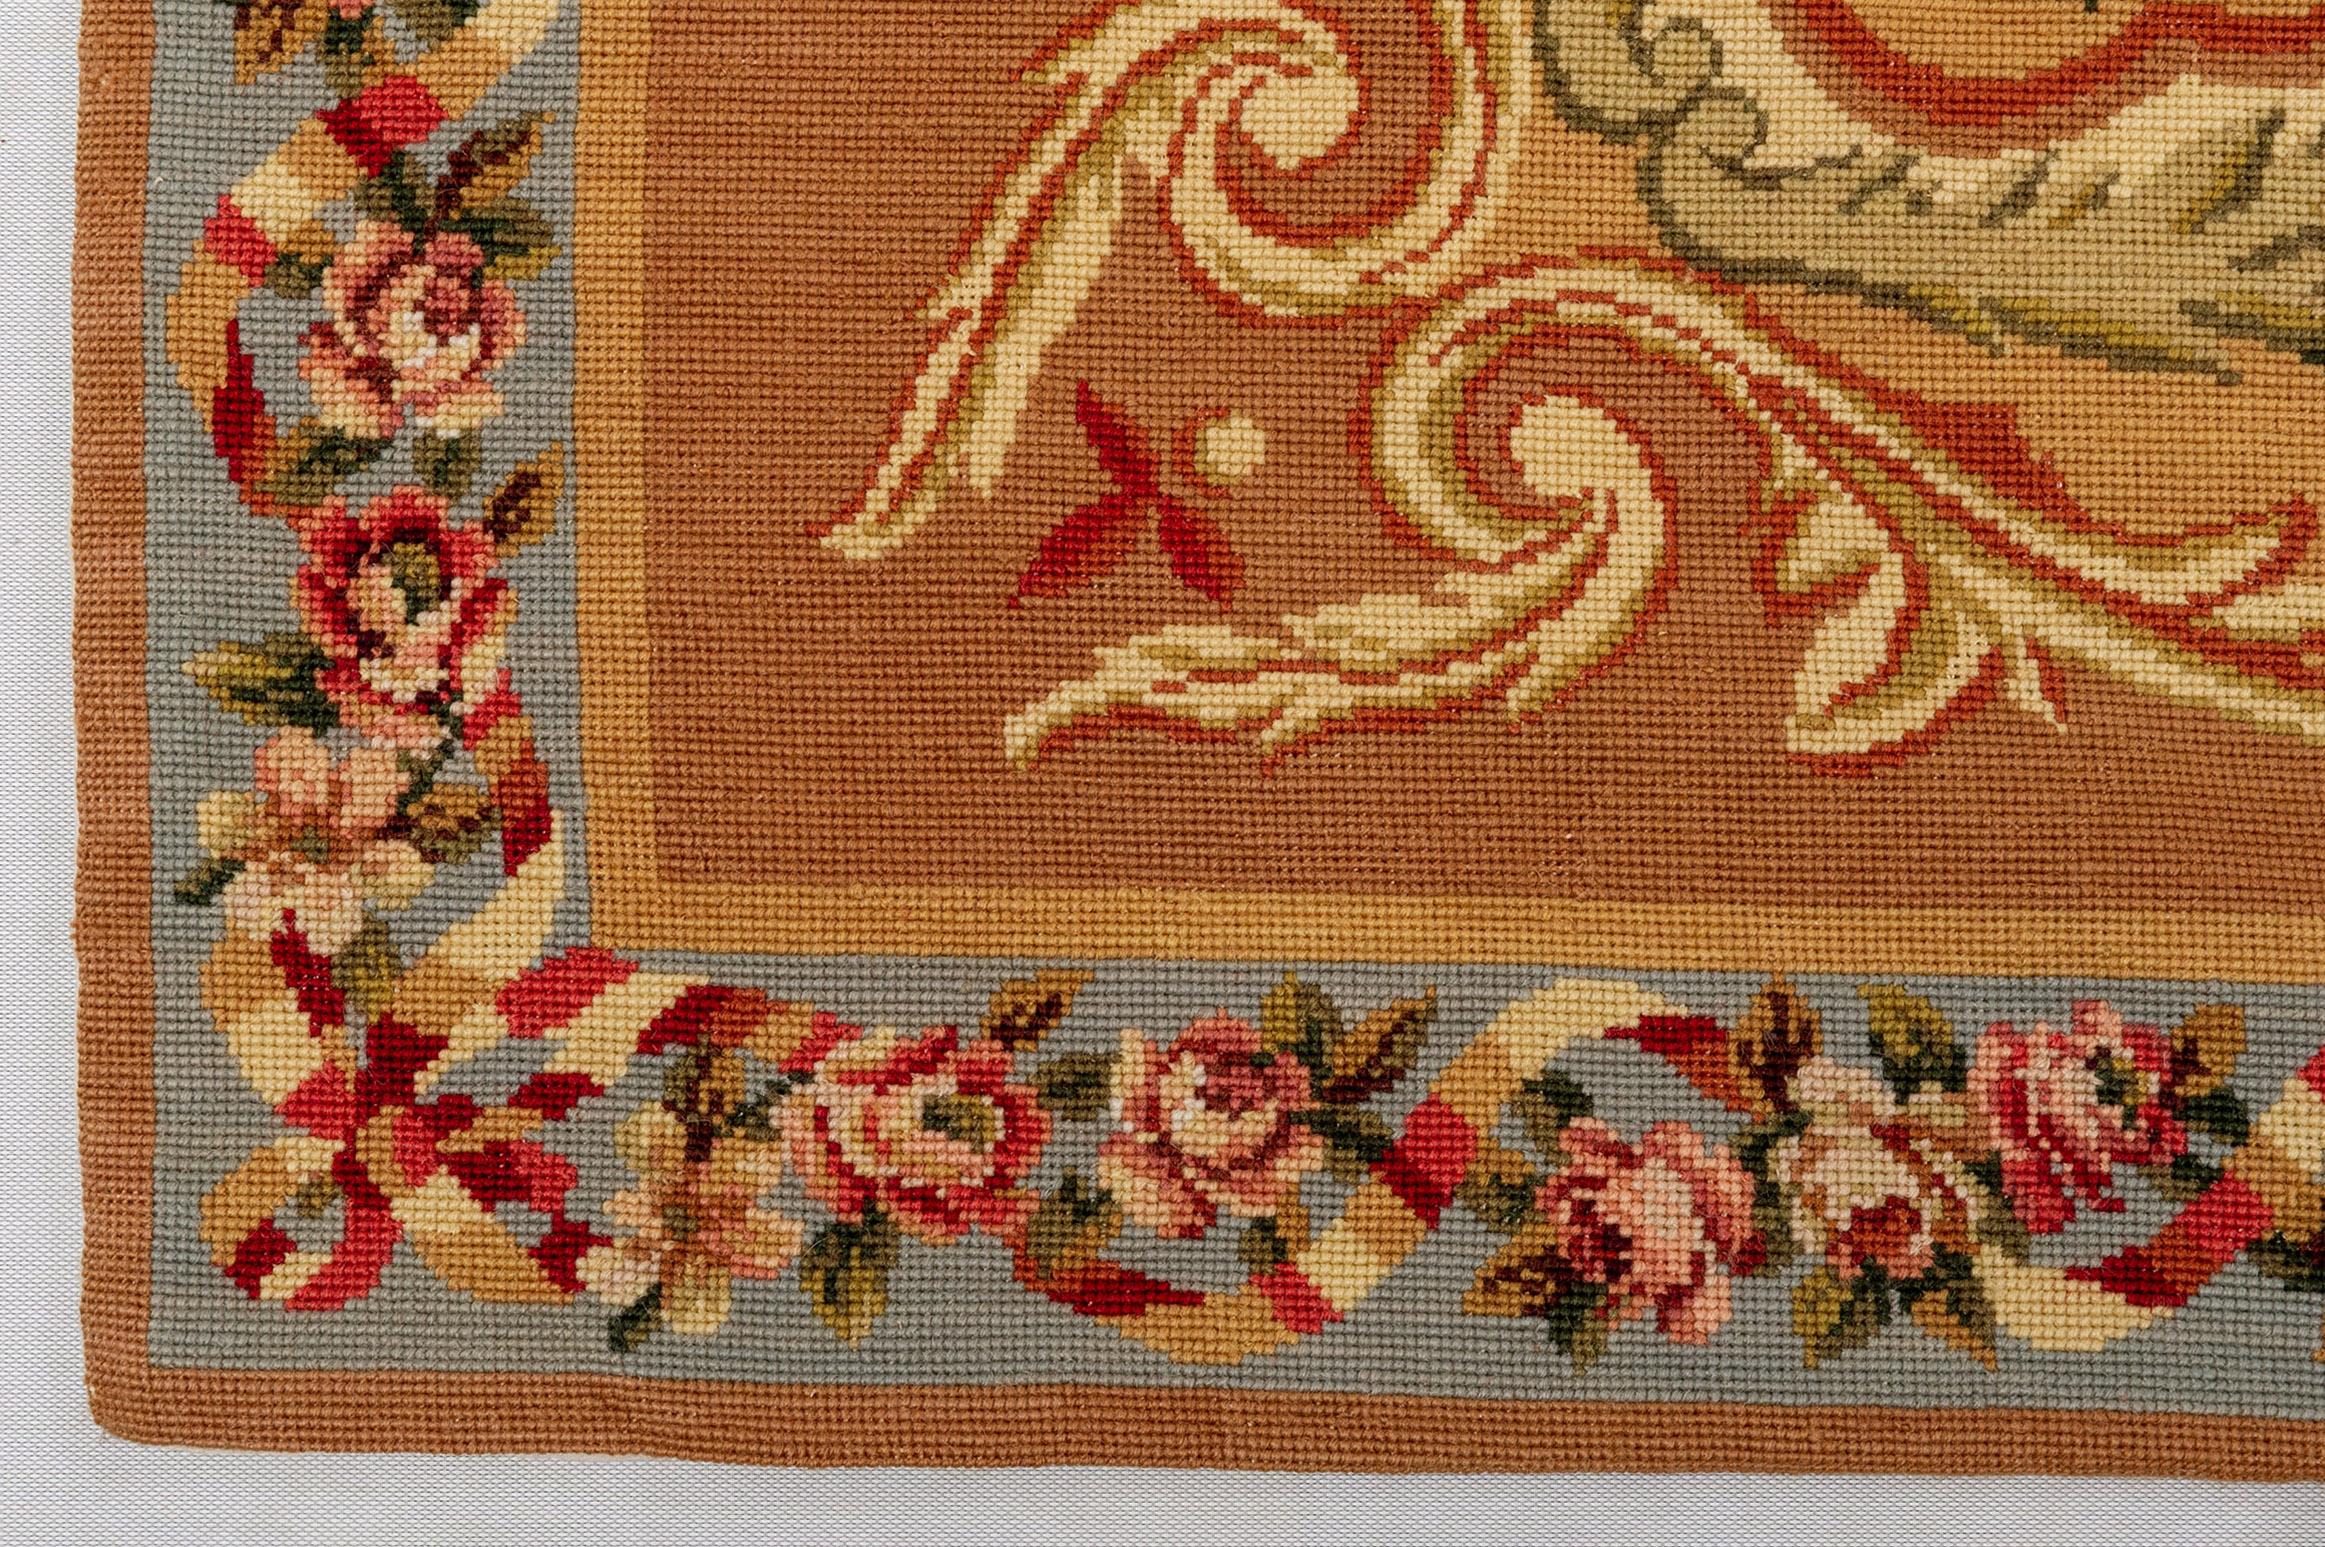 Hand-Woven Needle Point Carpet or Tapestry in Aubusson Style For Sale